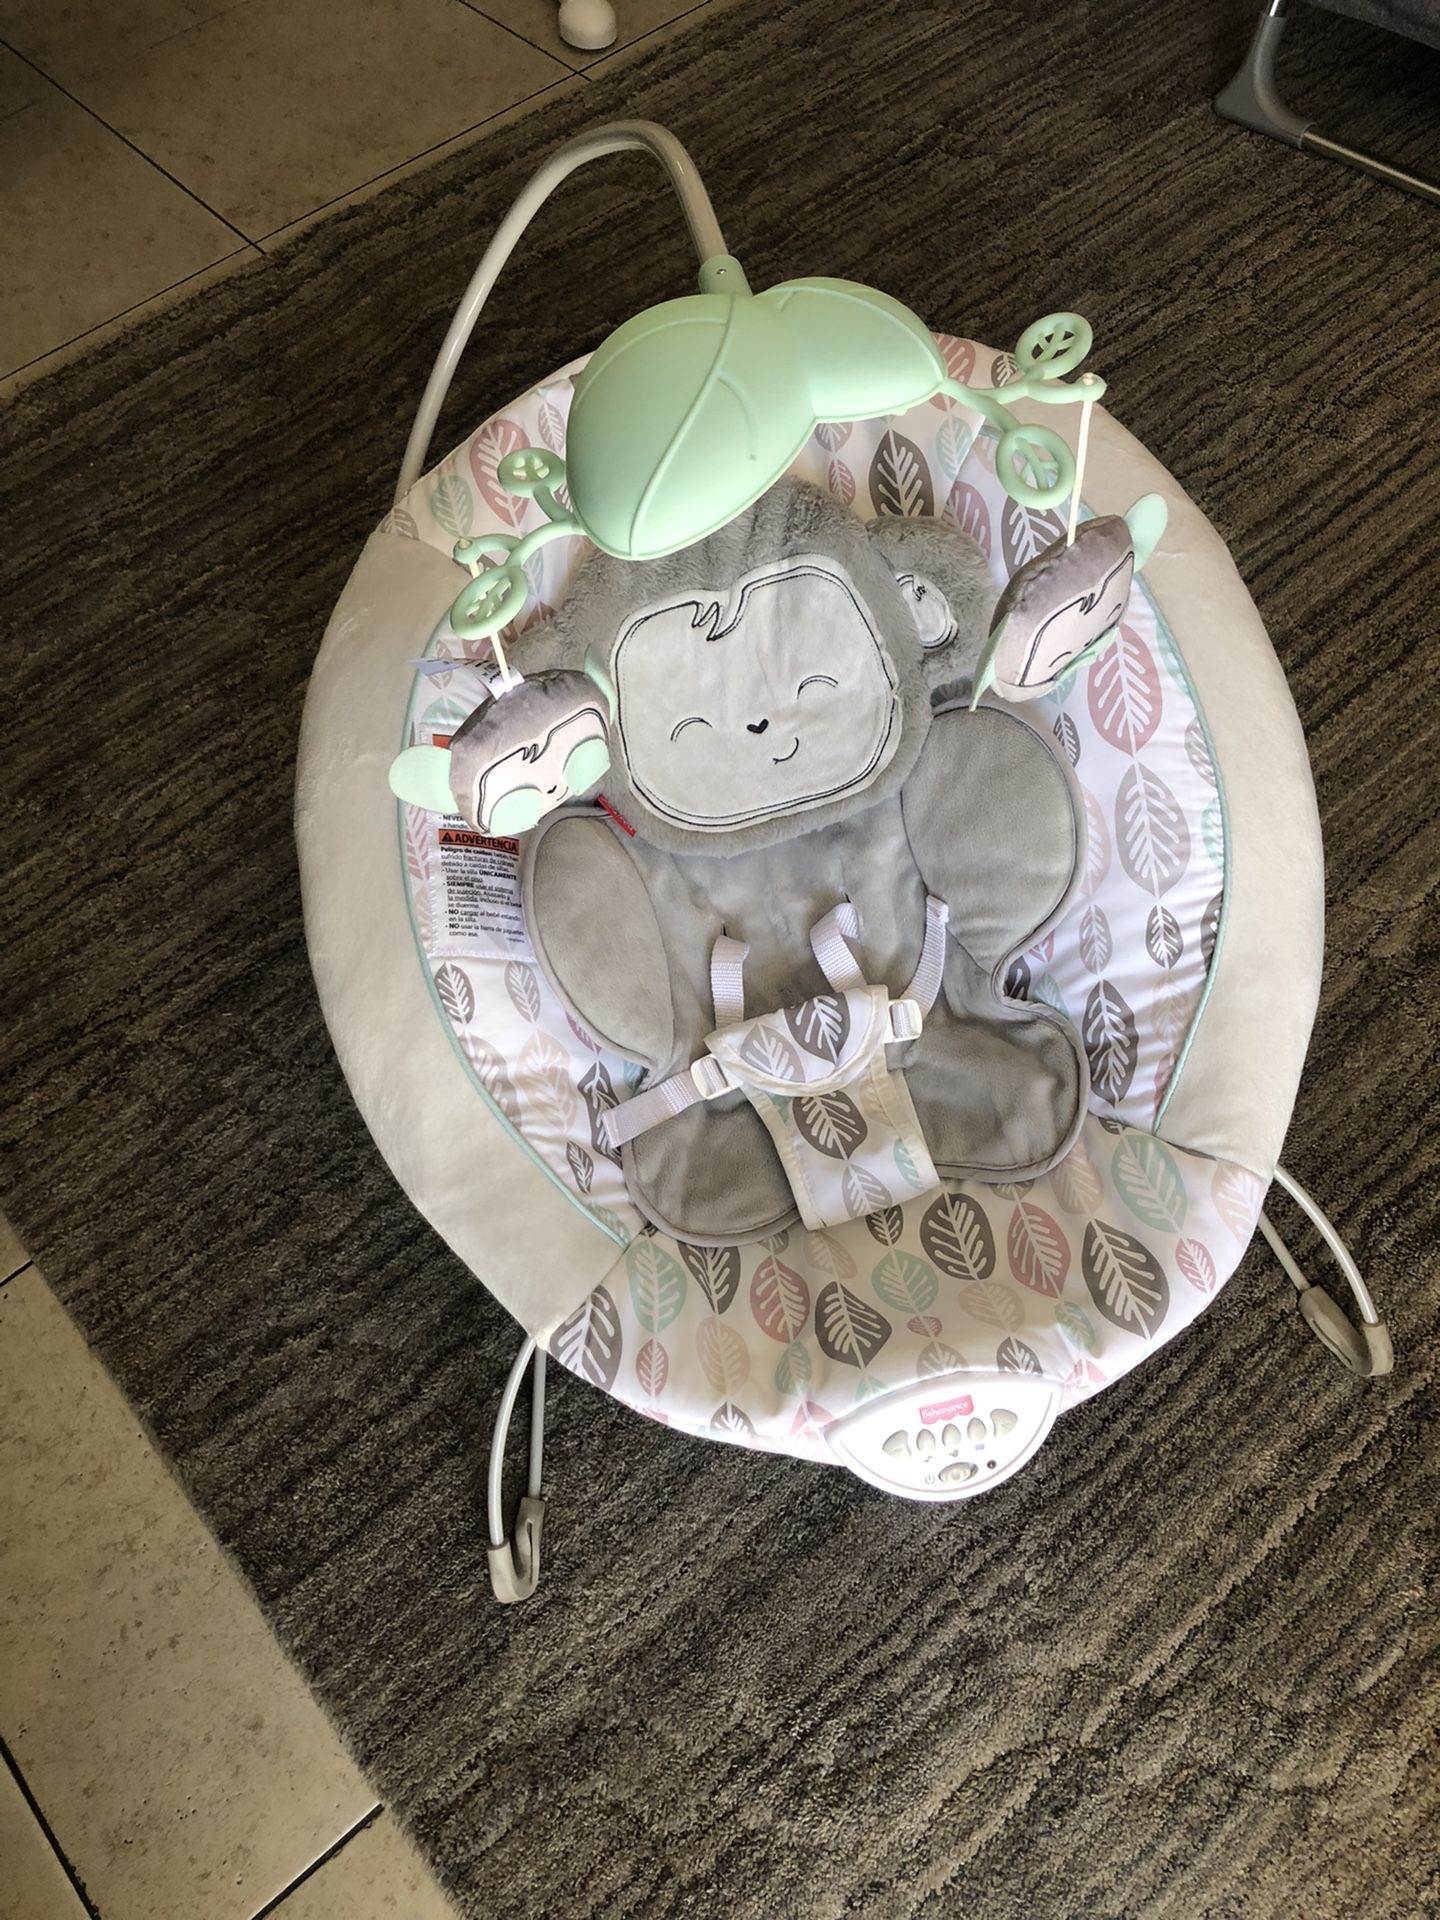 Baby Bouncer Great Condition $25